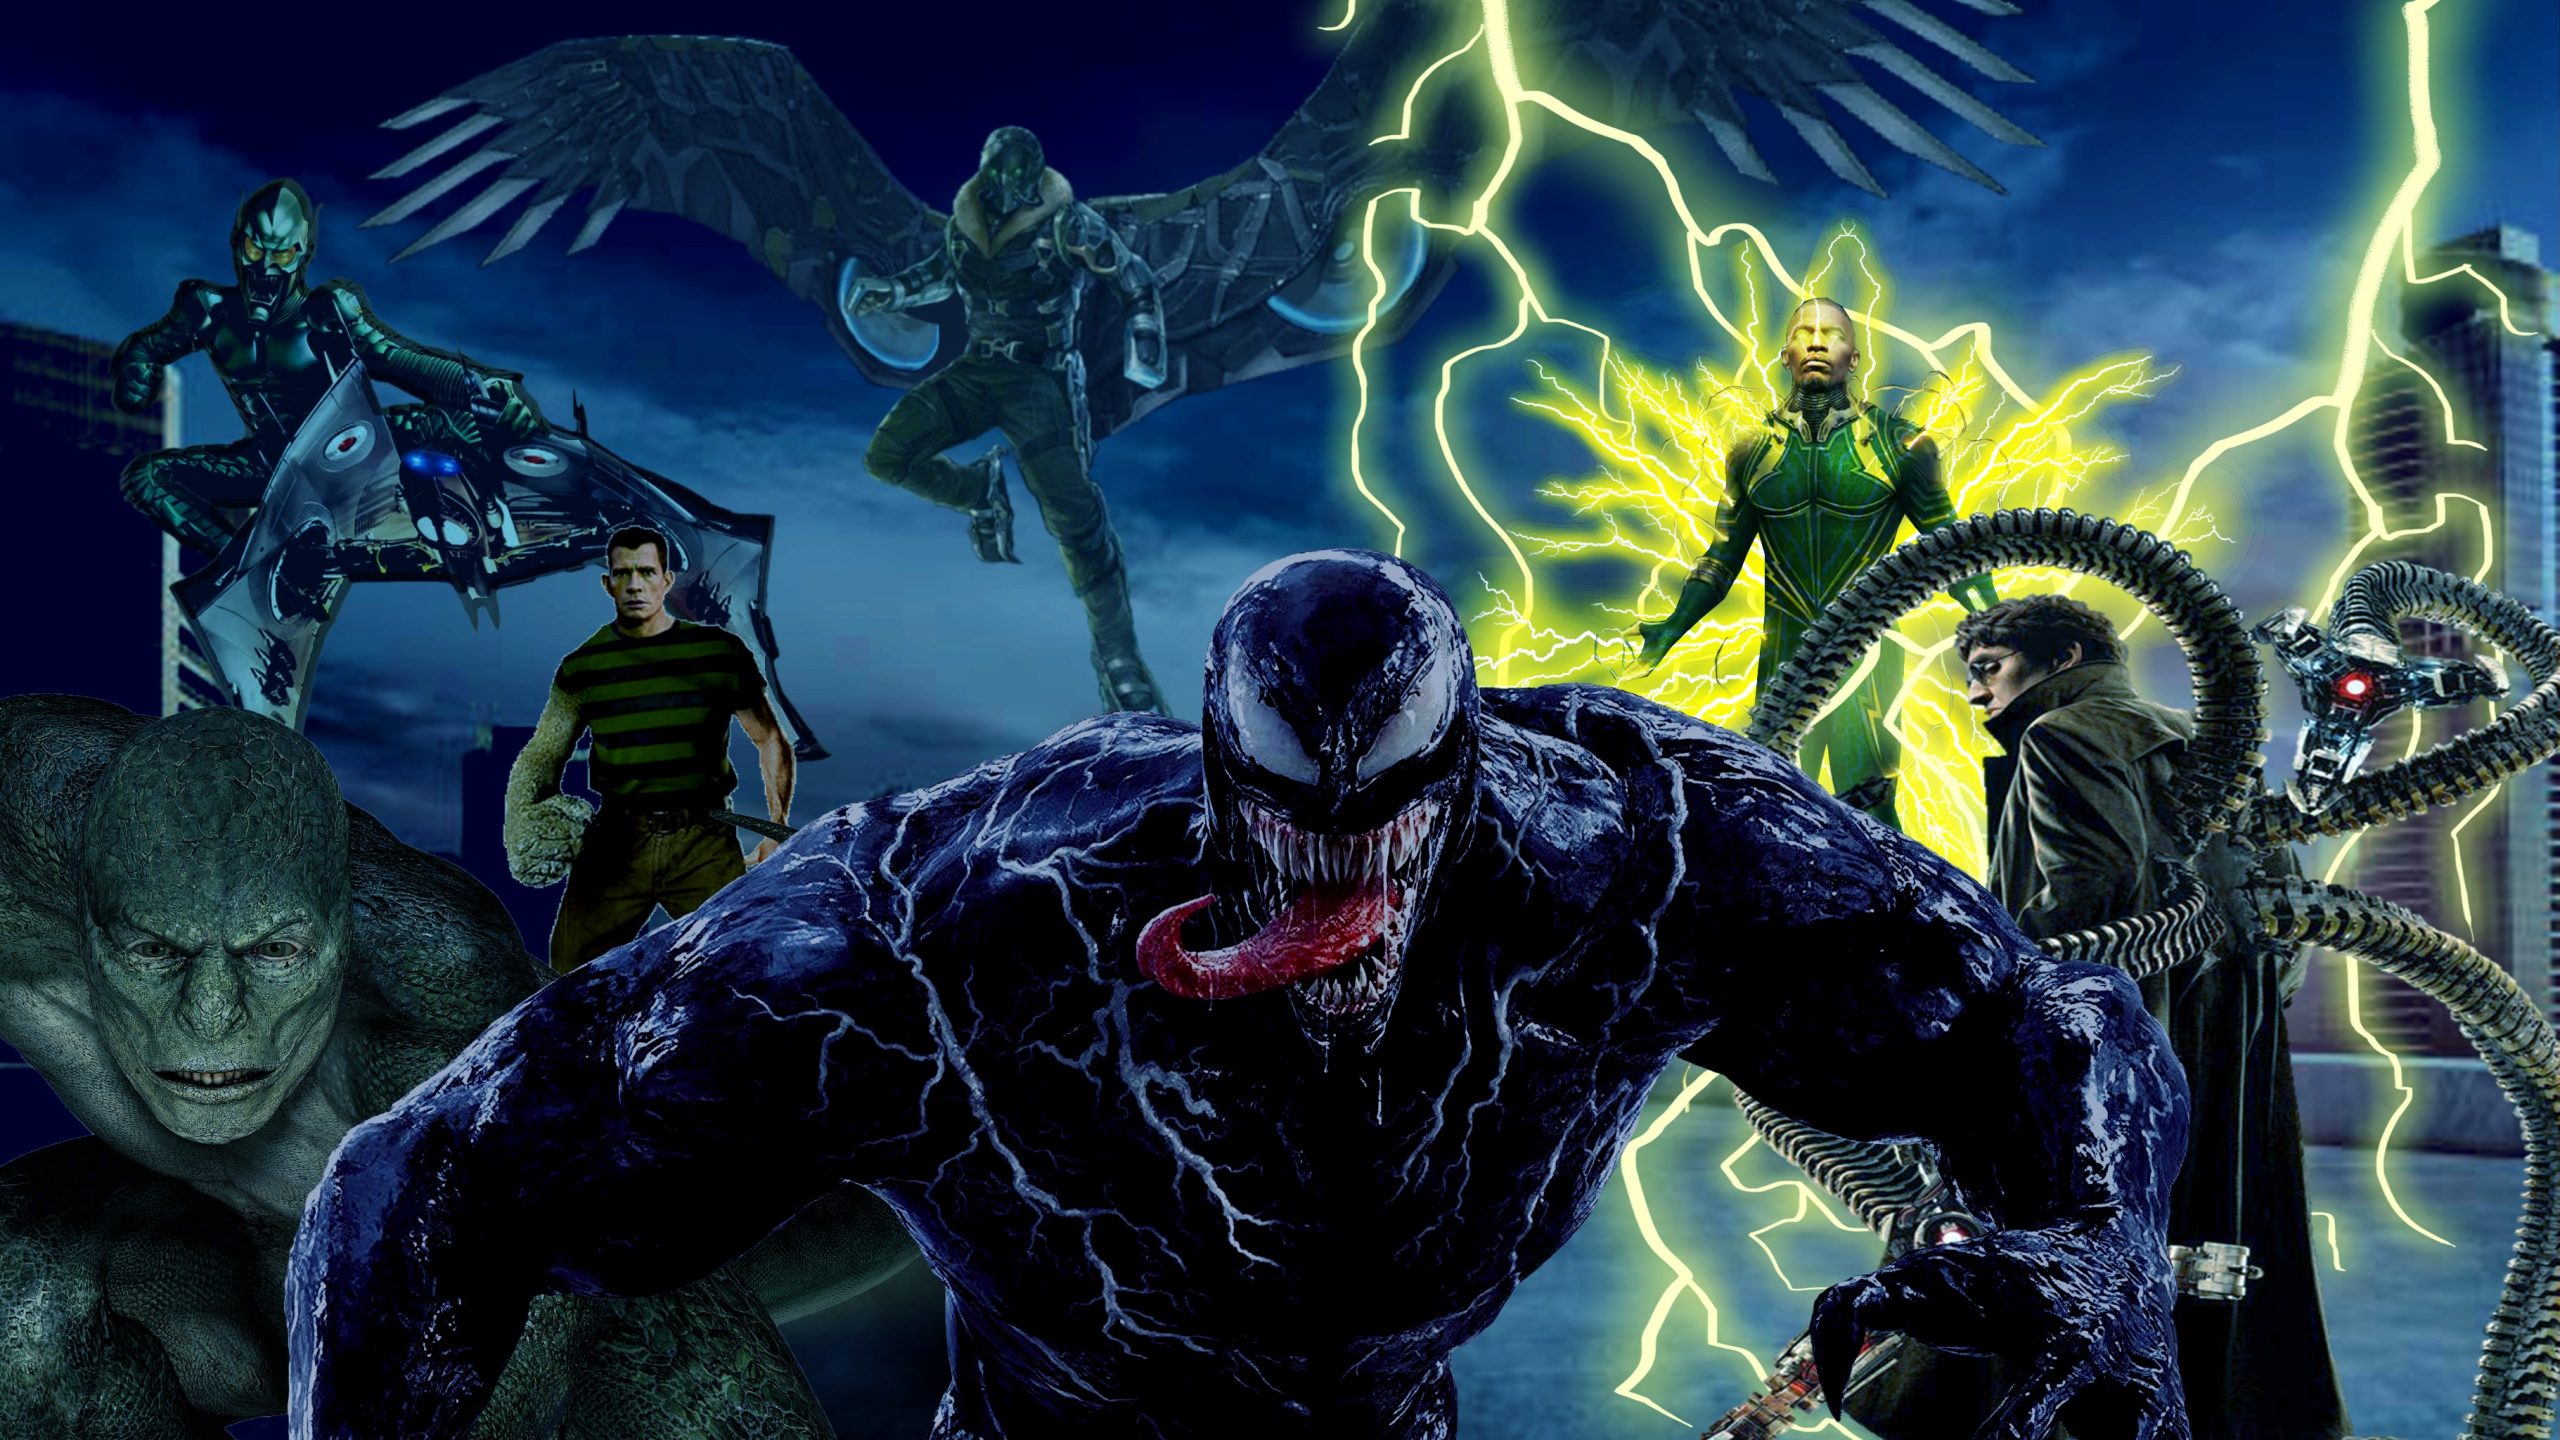 Spider-Man No Way Home: Is Venom the Final Member of the Sinister 6?